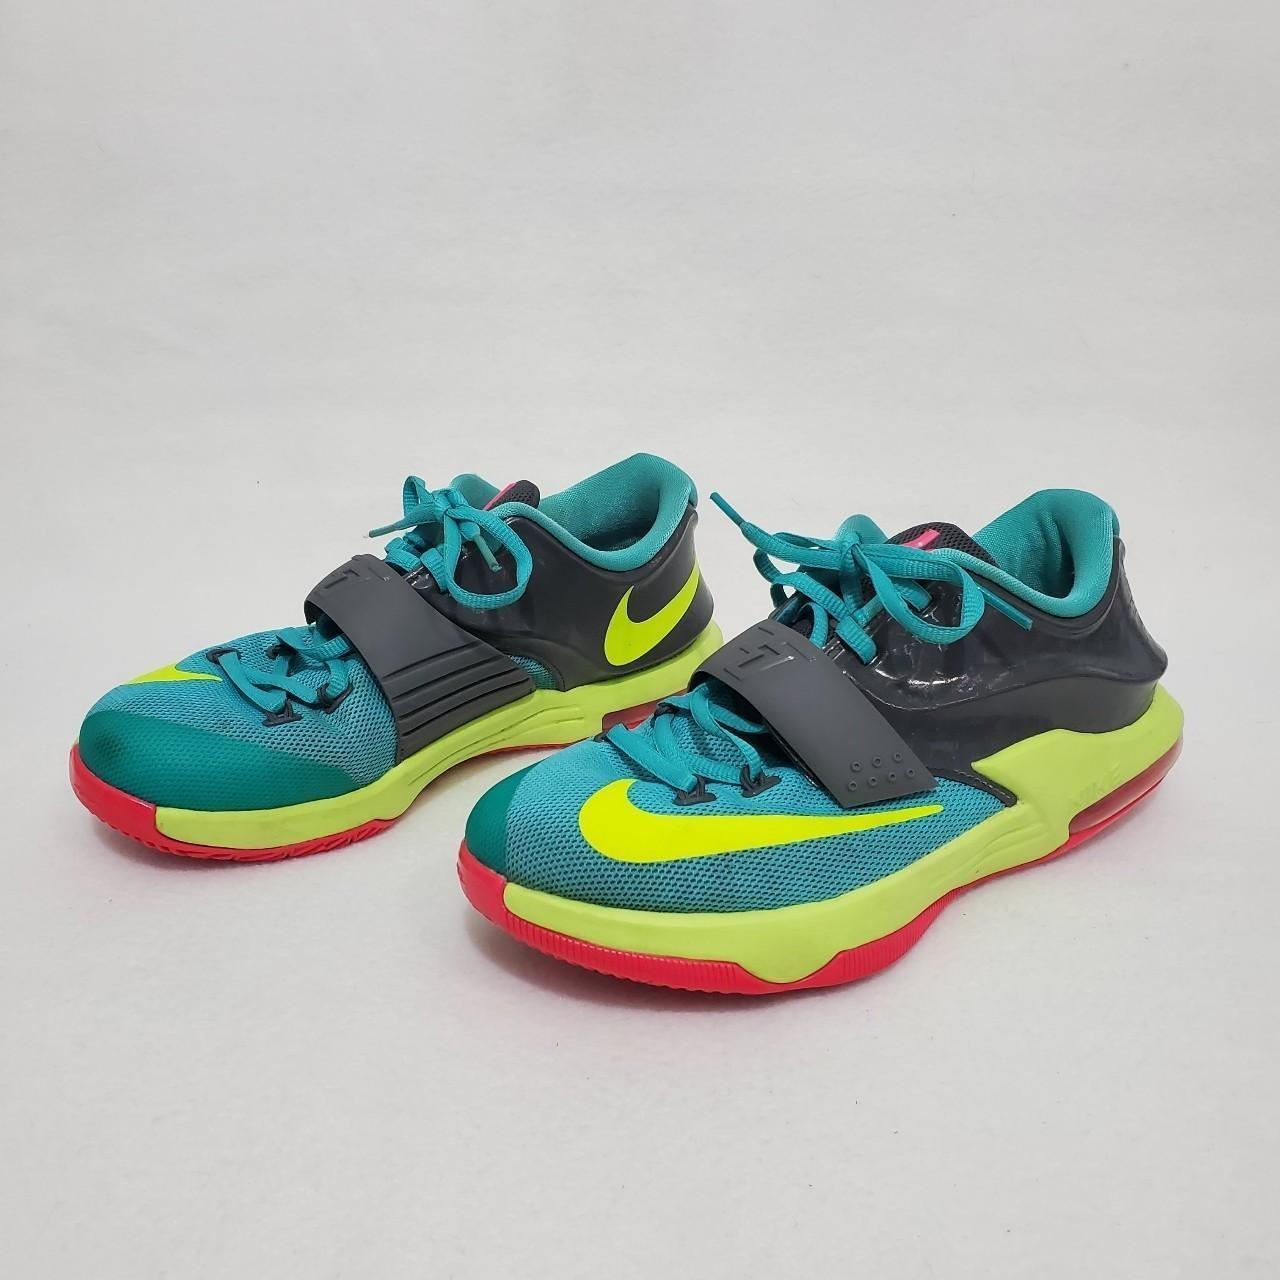 kd shoes green and blue